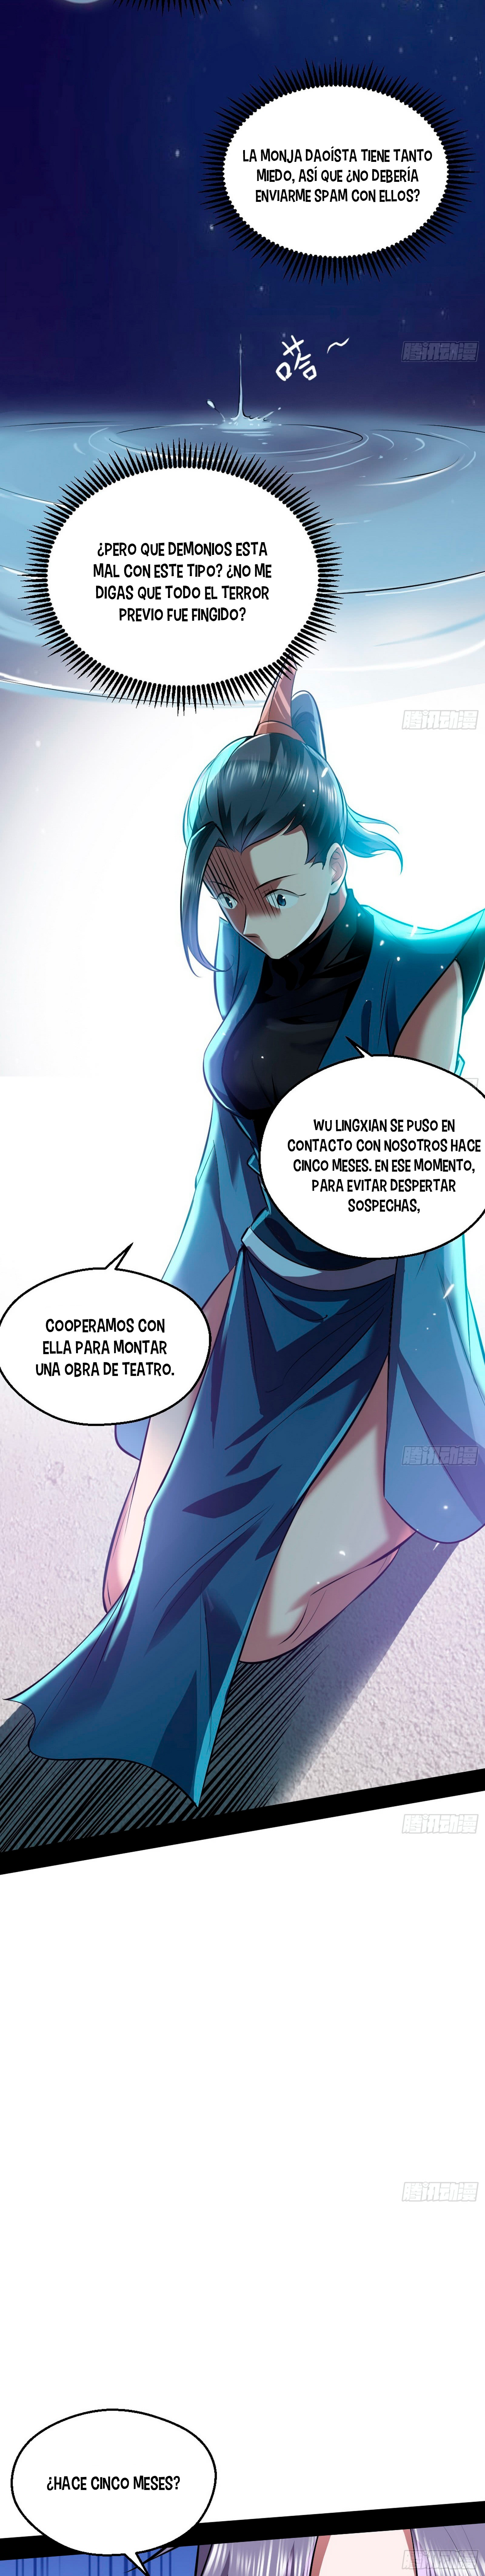 Manga Soy un dios maligno Chapter 45 image number 21